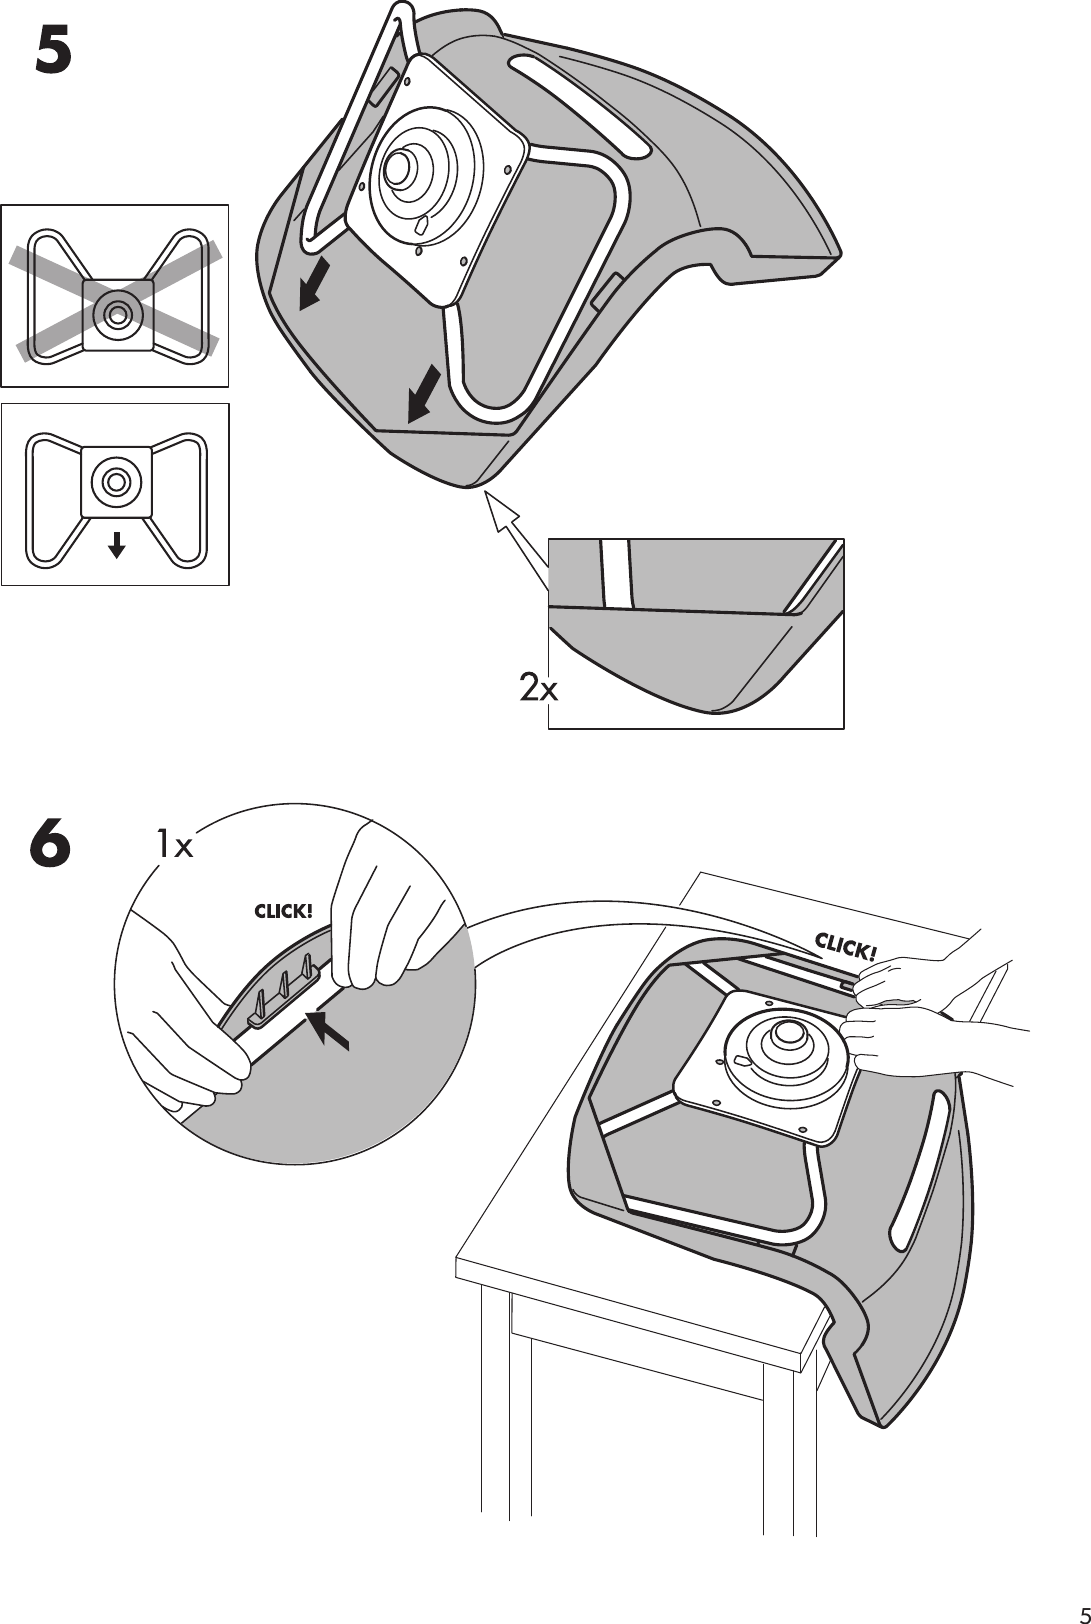 Page 5 of 8 - Ikea Ikea-Snille-Swivel-Chair-Frame-Assembly-Instruction